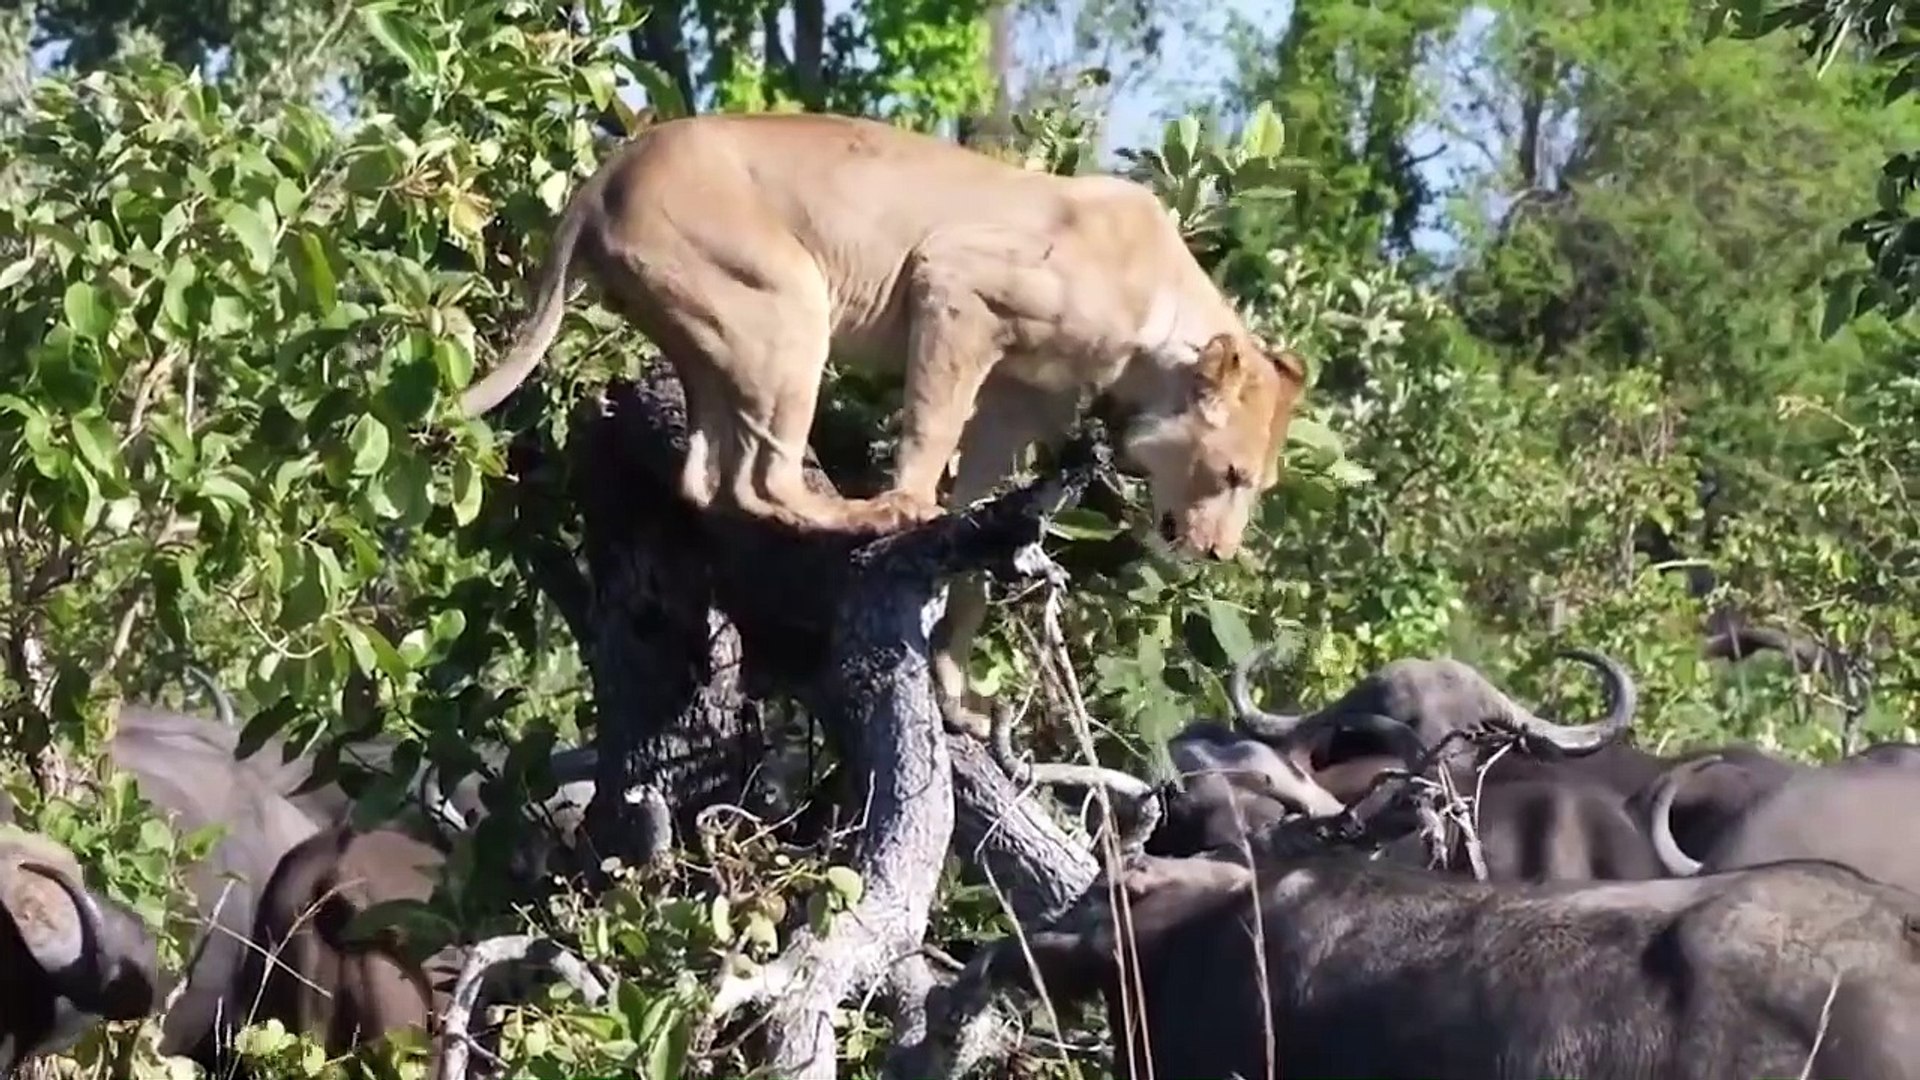 The Buffalo's Strong Butt Caused Lion To Die Tragically - Lion vs Giraffe, Porcupine, Buffalo